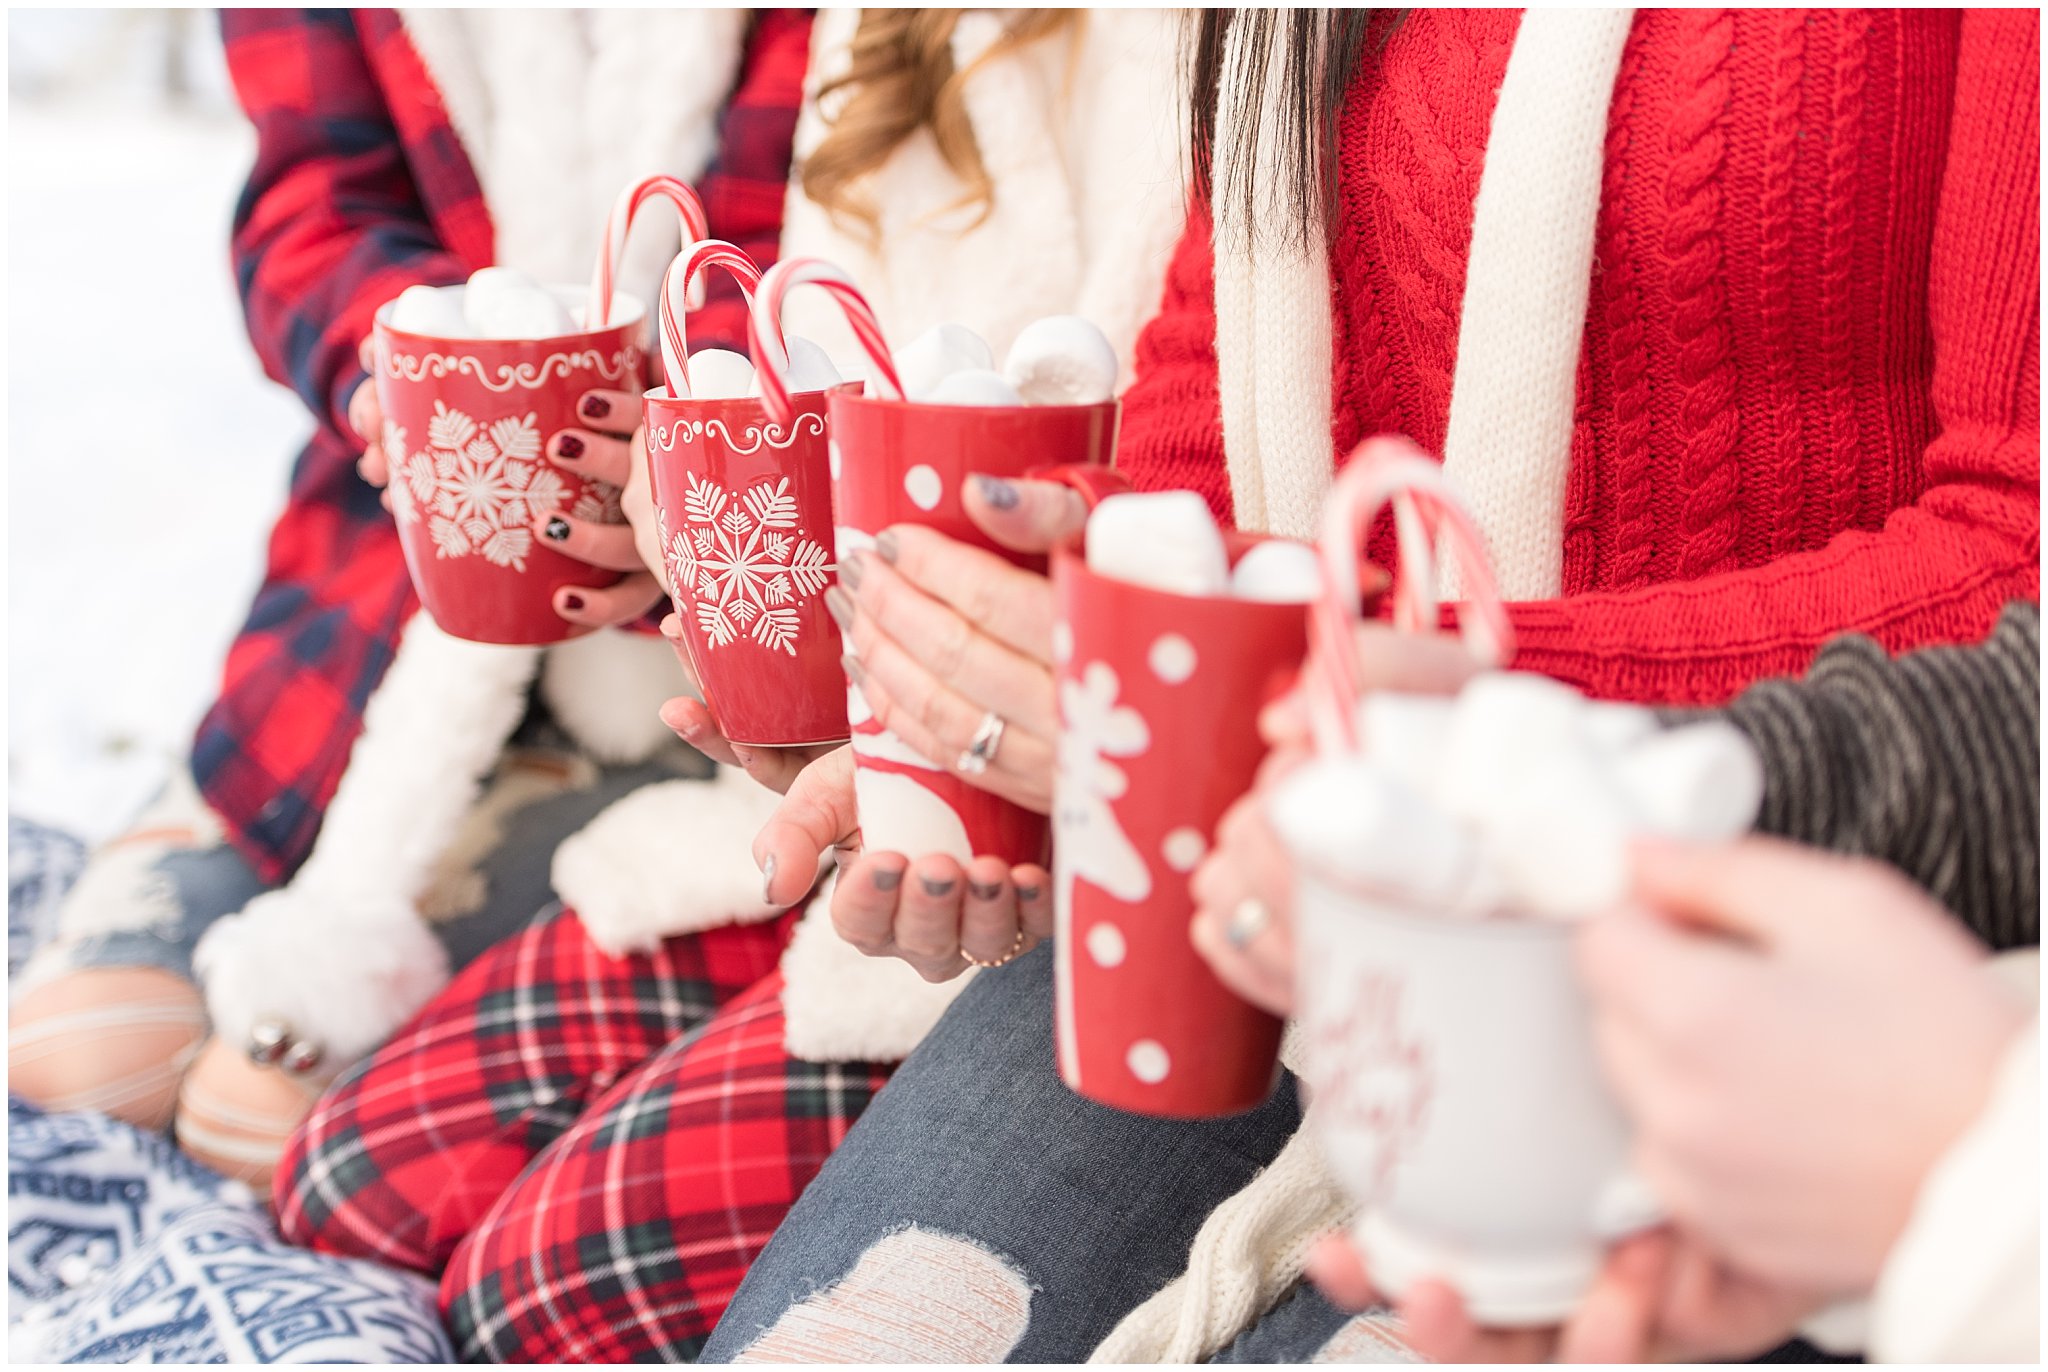 Line of cute hot chocolate cups and marshmallows in the snow | Utah Family Christmas Photoshoot | Oak Hills Reception and Event | Jessie and Dallin Photography